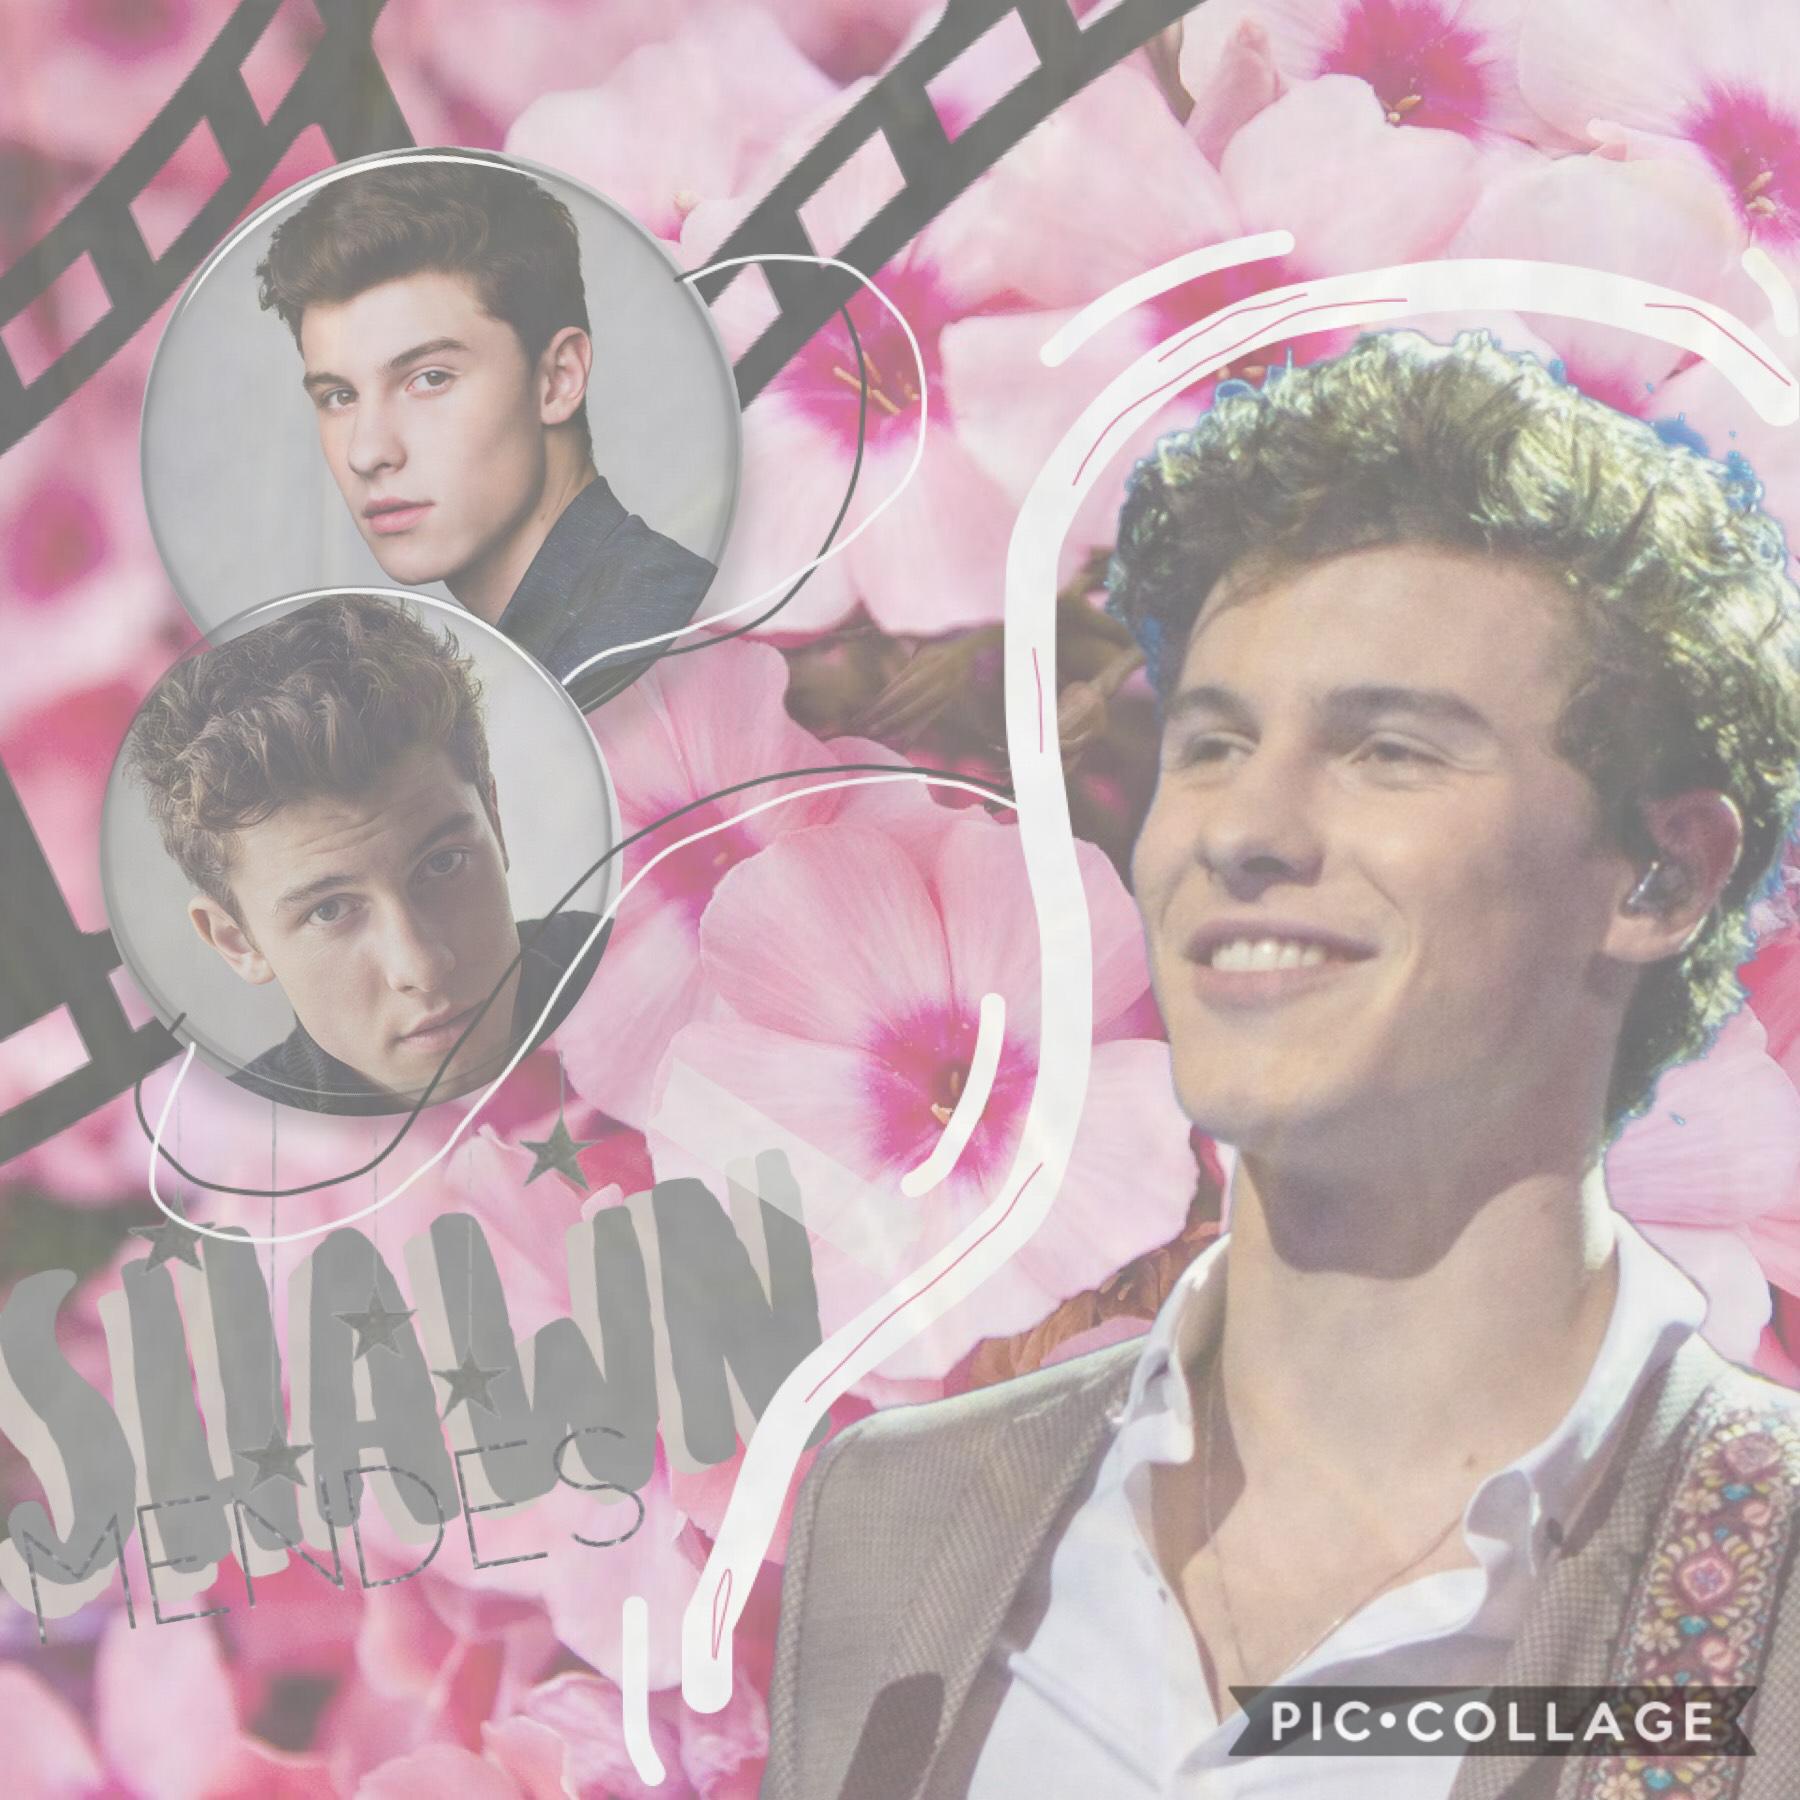     🎄🎄🎄🎄TAPPY🎄🎄🎄🎄


Here’s a Shawn mendes Edit for you guys!! Comment ur favorite song of his and see if we are the same 😝😝